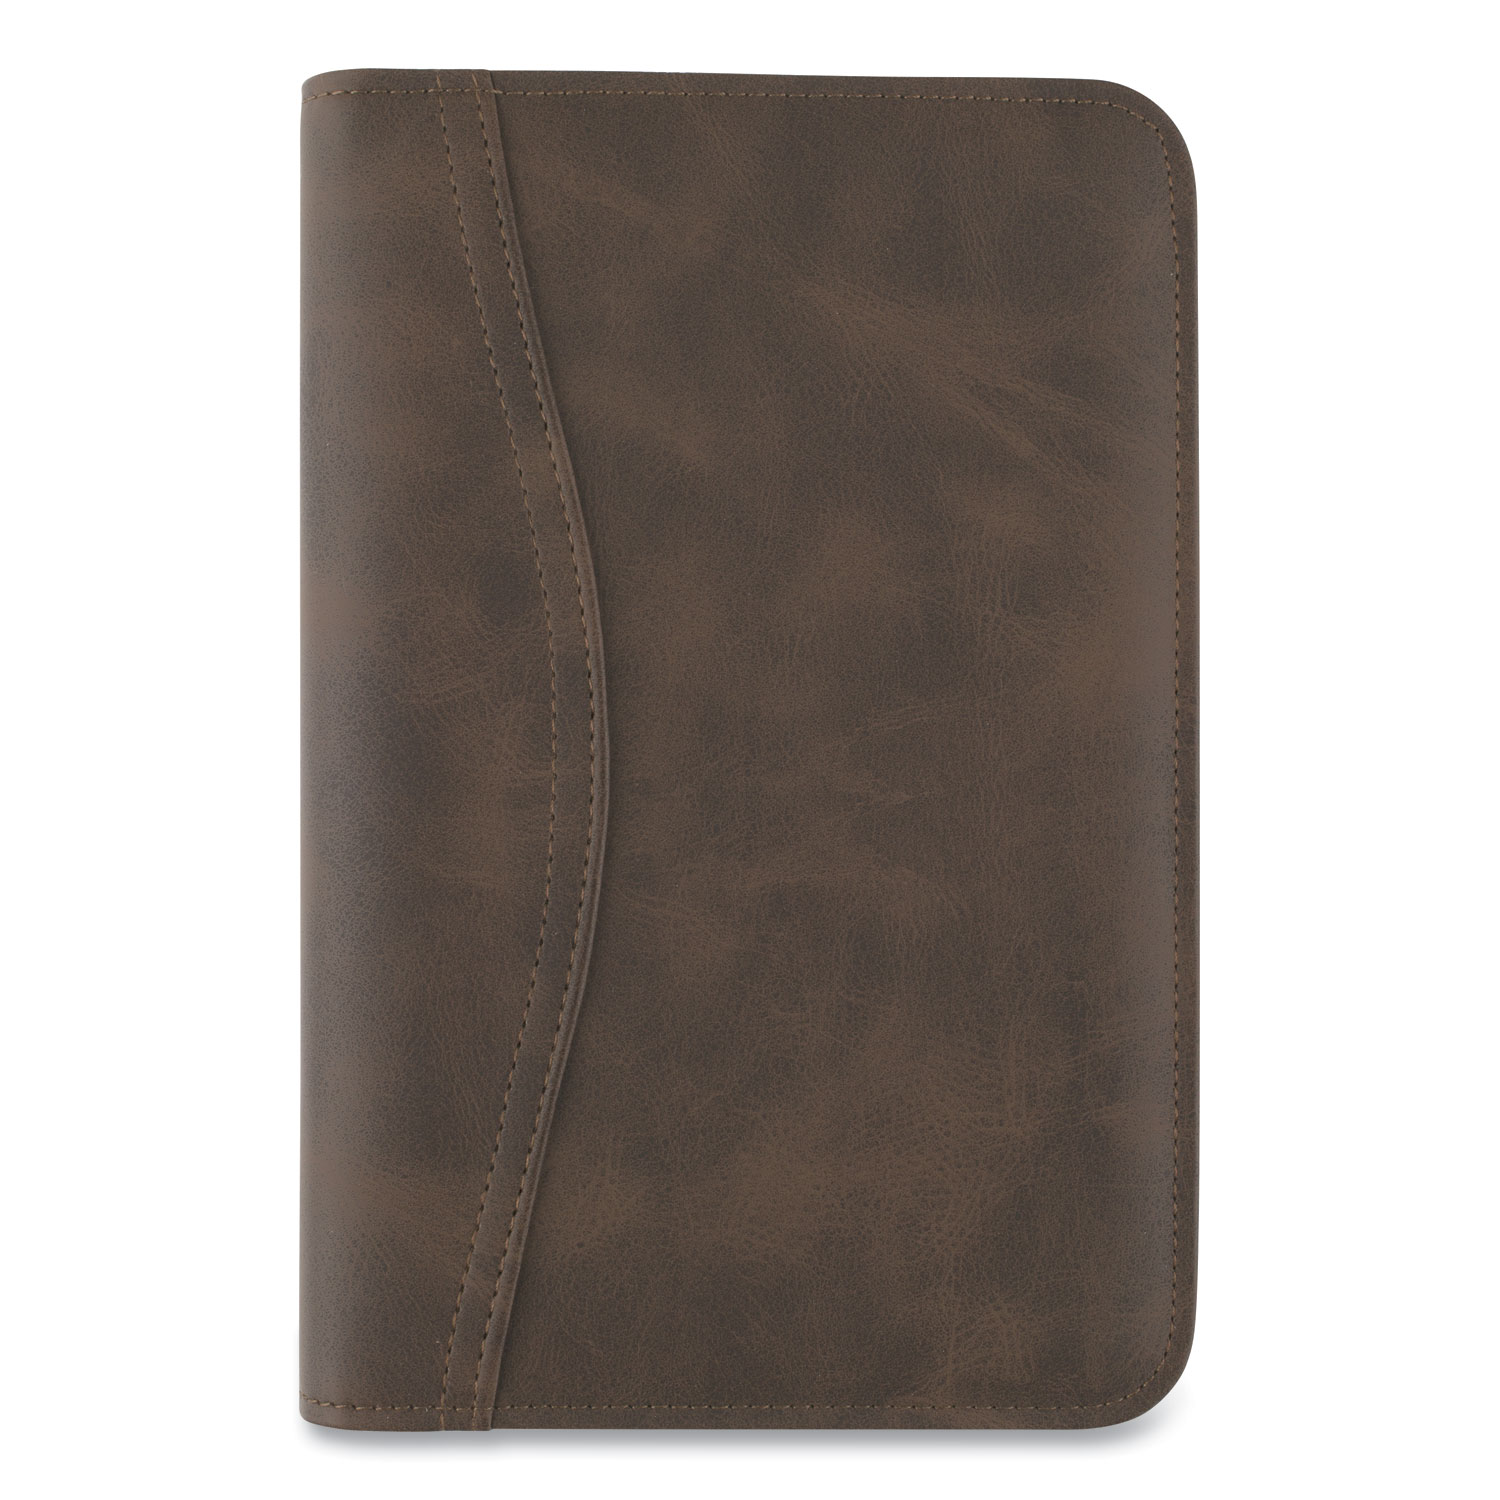  AT-A-GLANCE 033014004 Distressed Brown Leather Starter Set, 6.75 x 3.75, Brown (AAG033014004) 